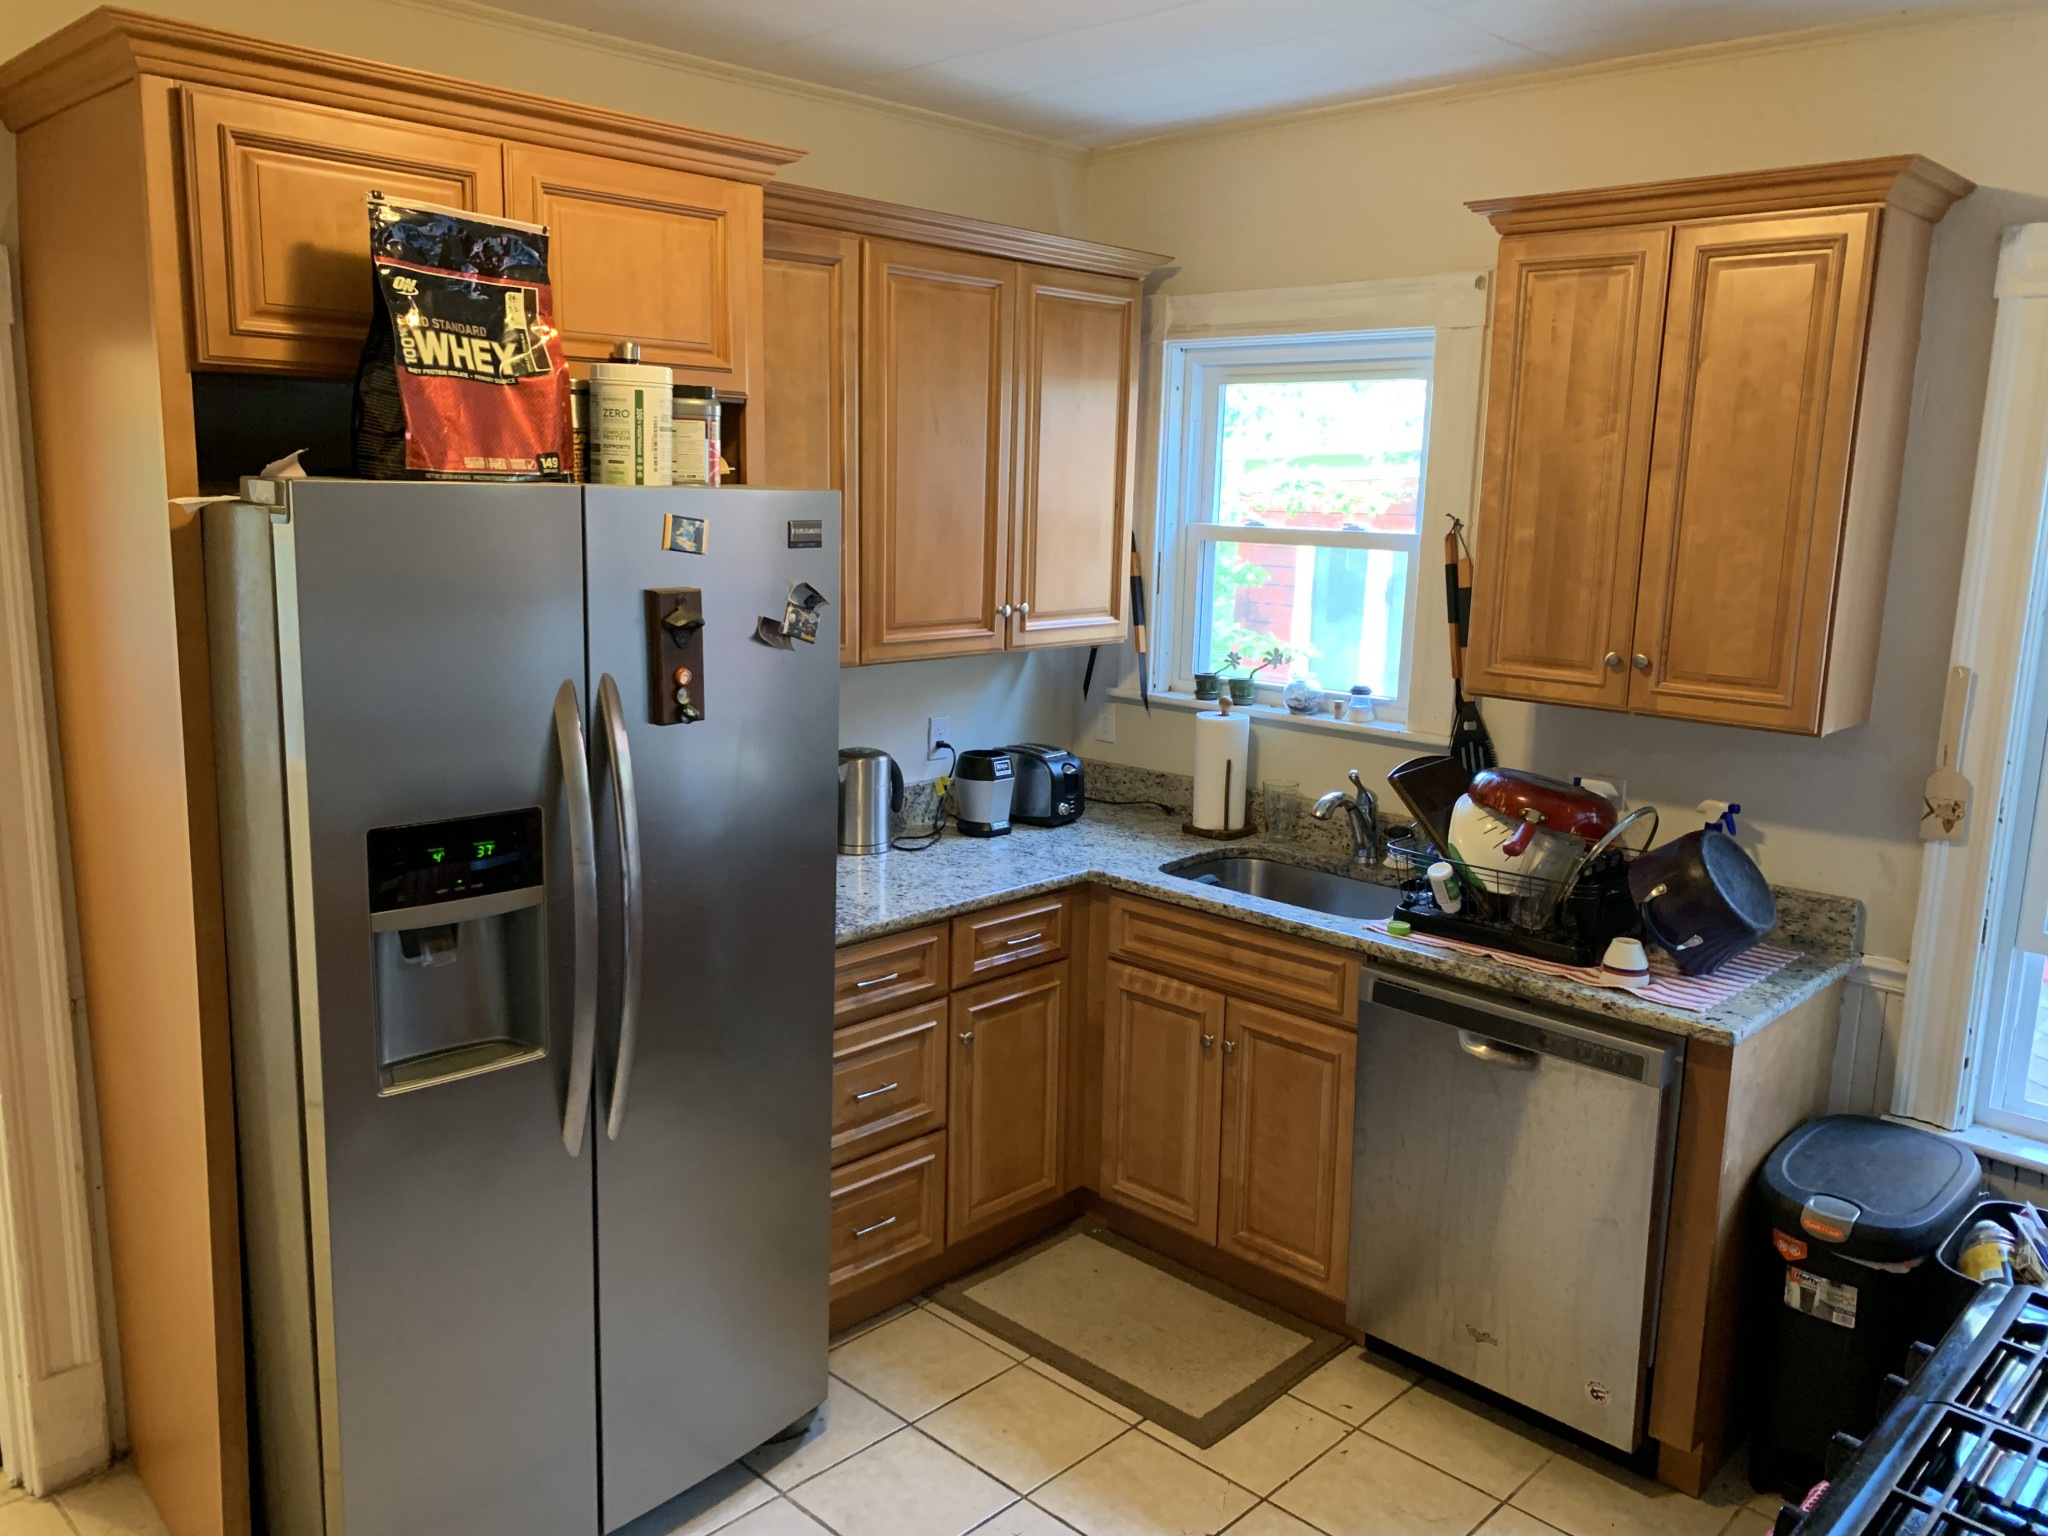 Photos of apartment on Winslow Ave.,Somerville MA 02144